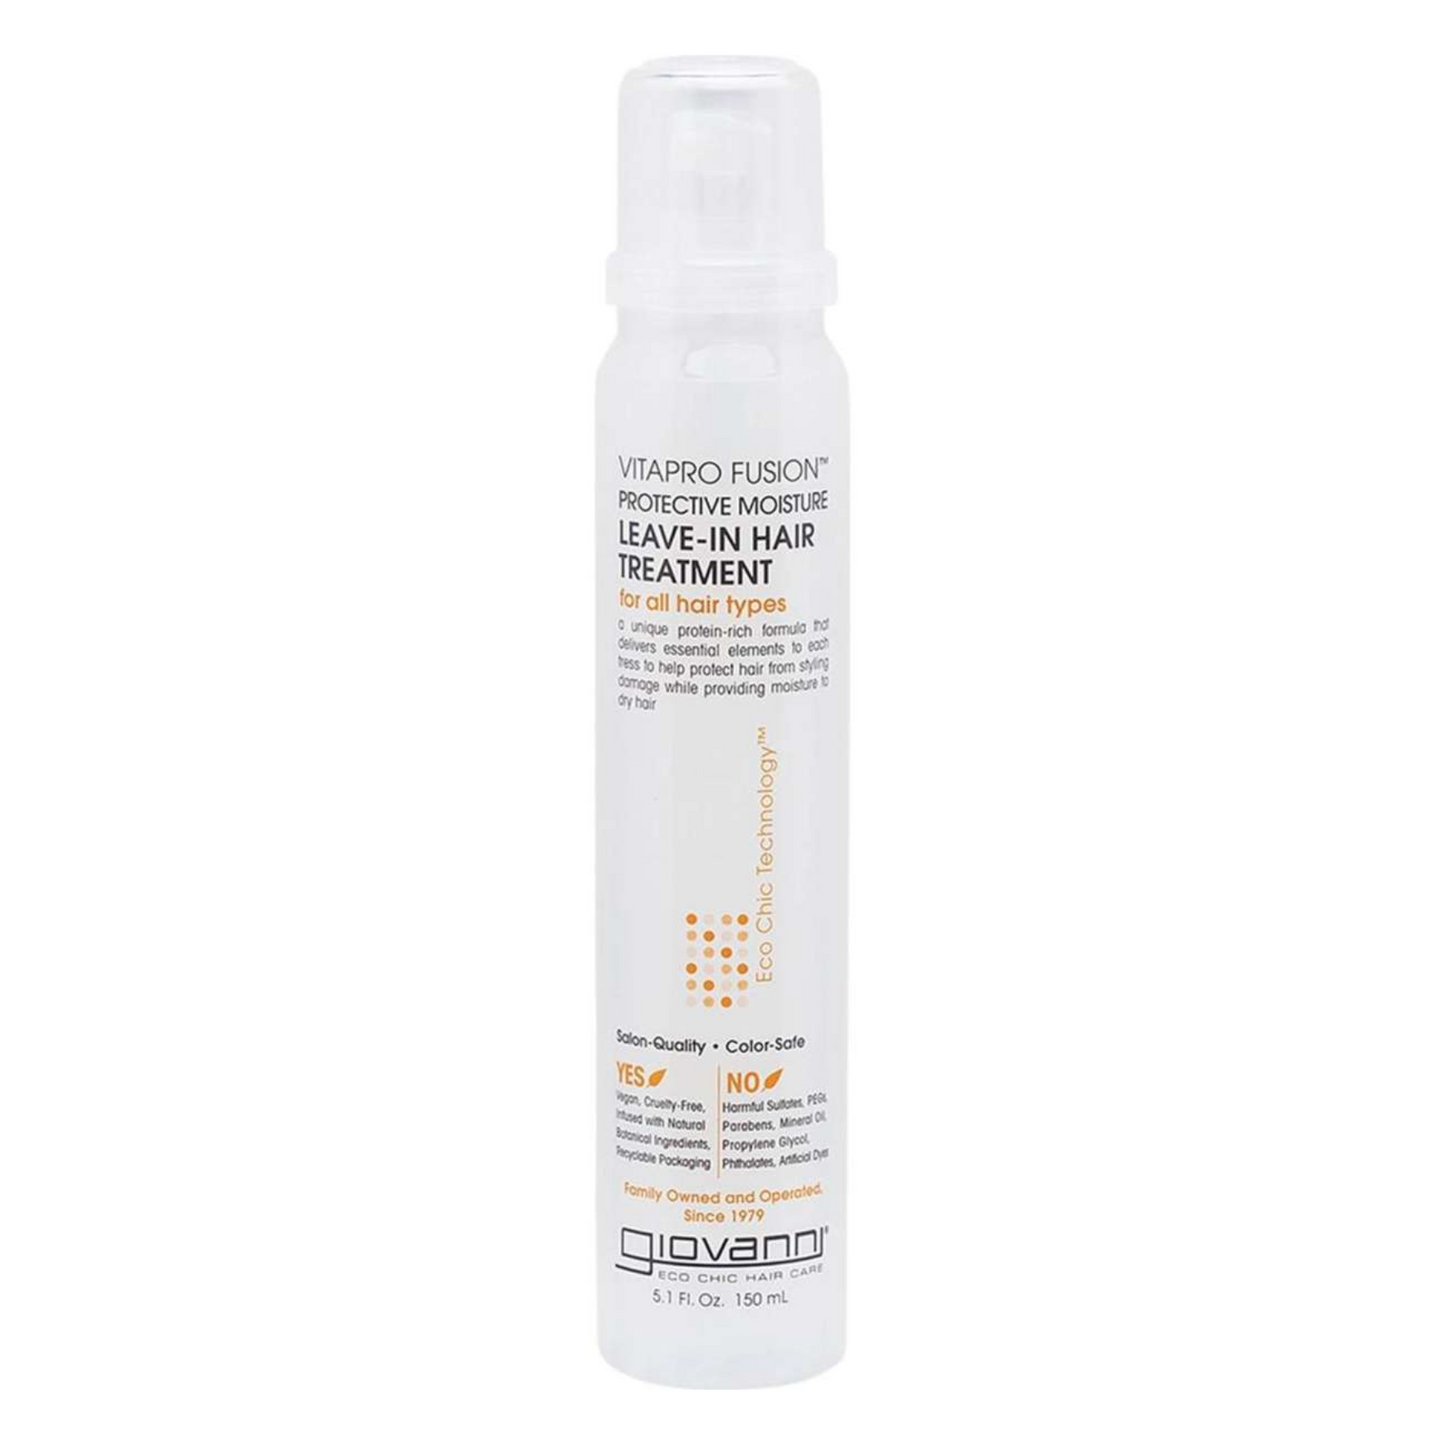 Giovanni Vitapro Fusion Protective Moisture Leave-In Hair Treatment 150ml, Penetrates & Protects Damaged Hair